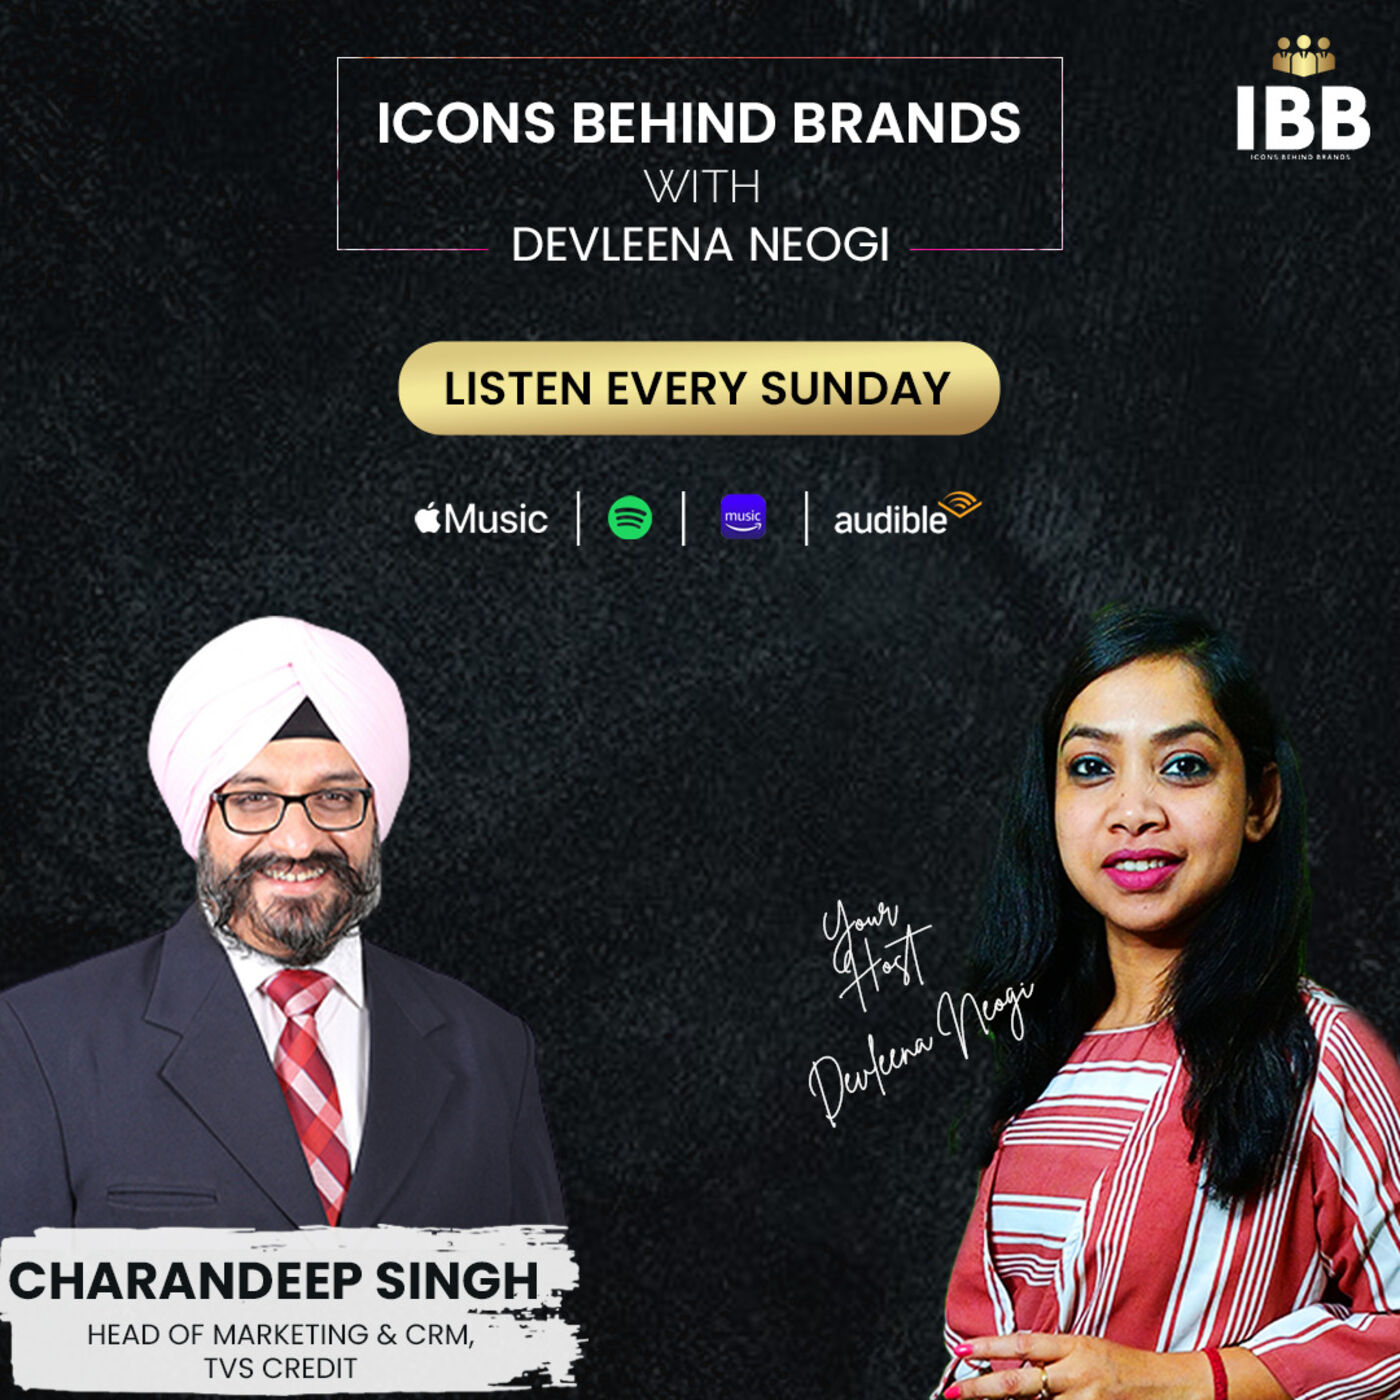 Soon bringing you another exciting interview with Head of Marketing of TVS Credit, Mr Charandeep Singh